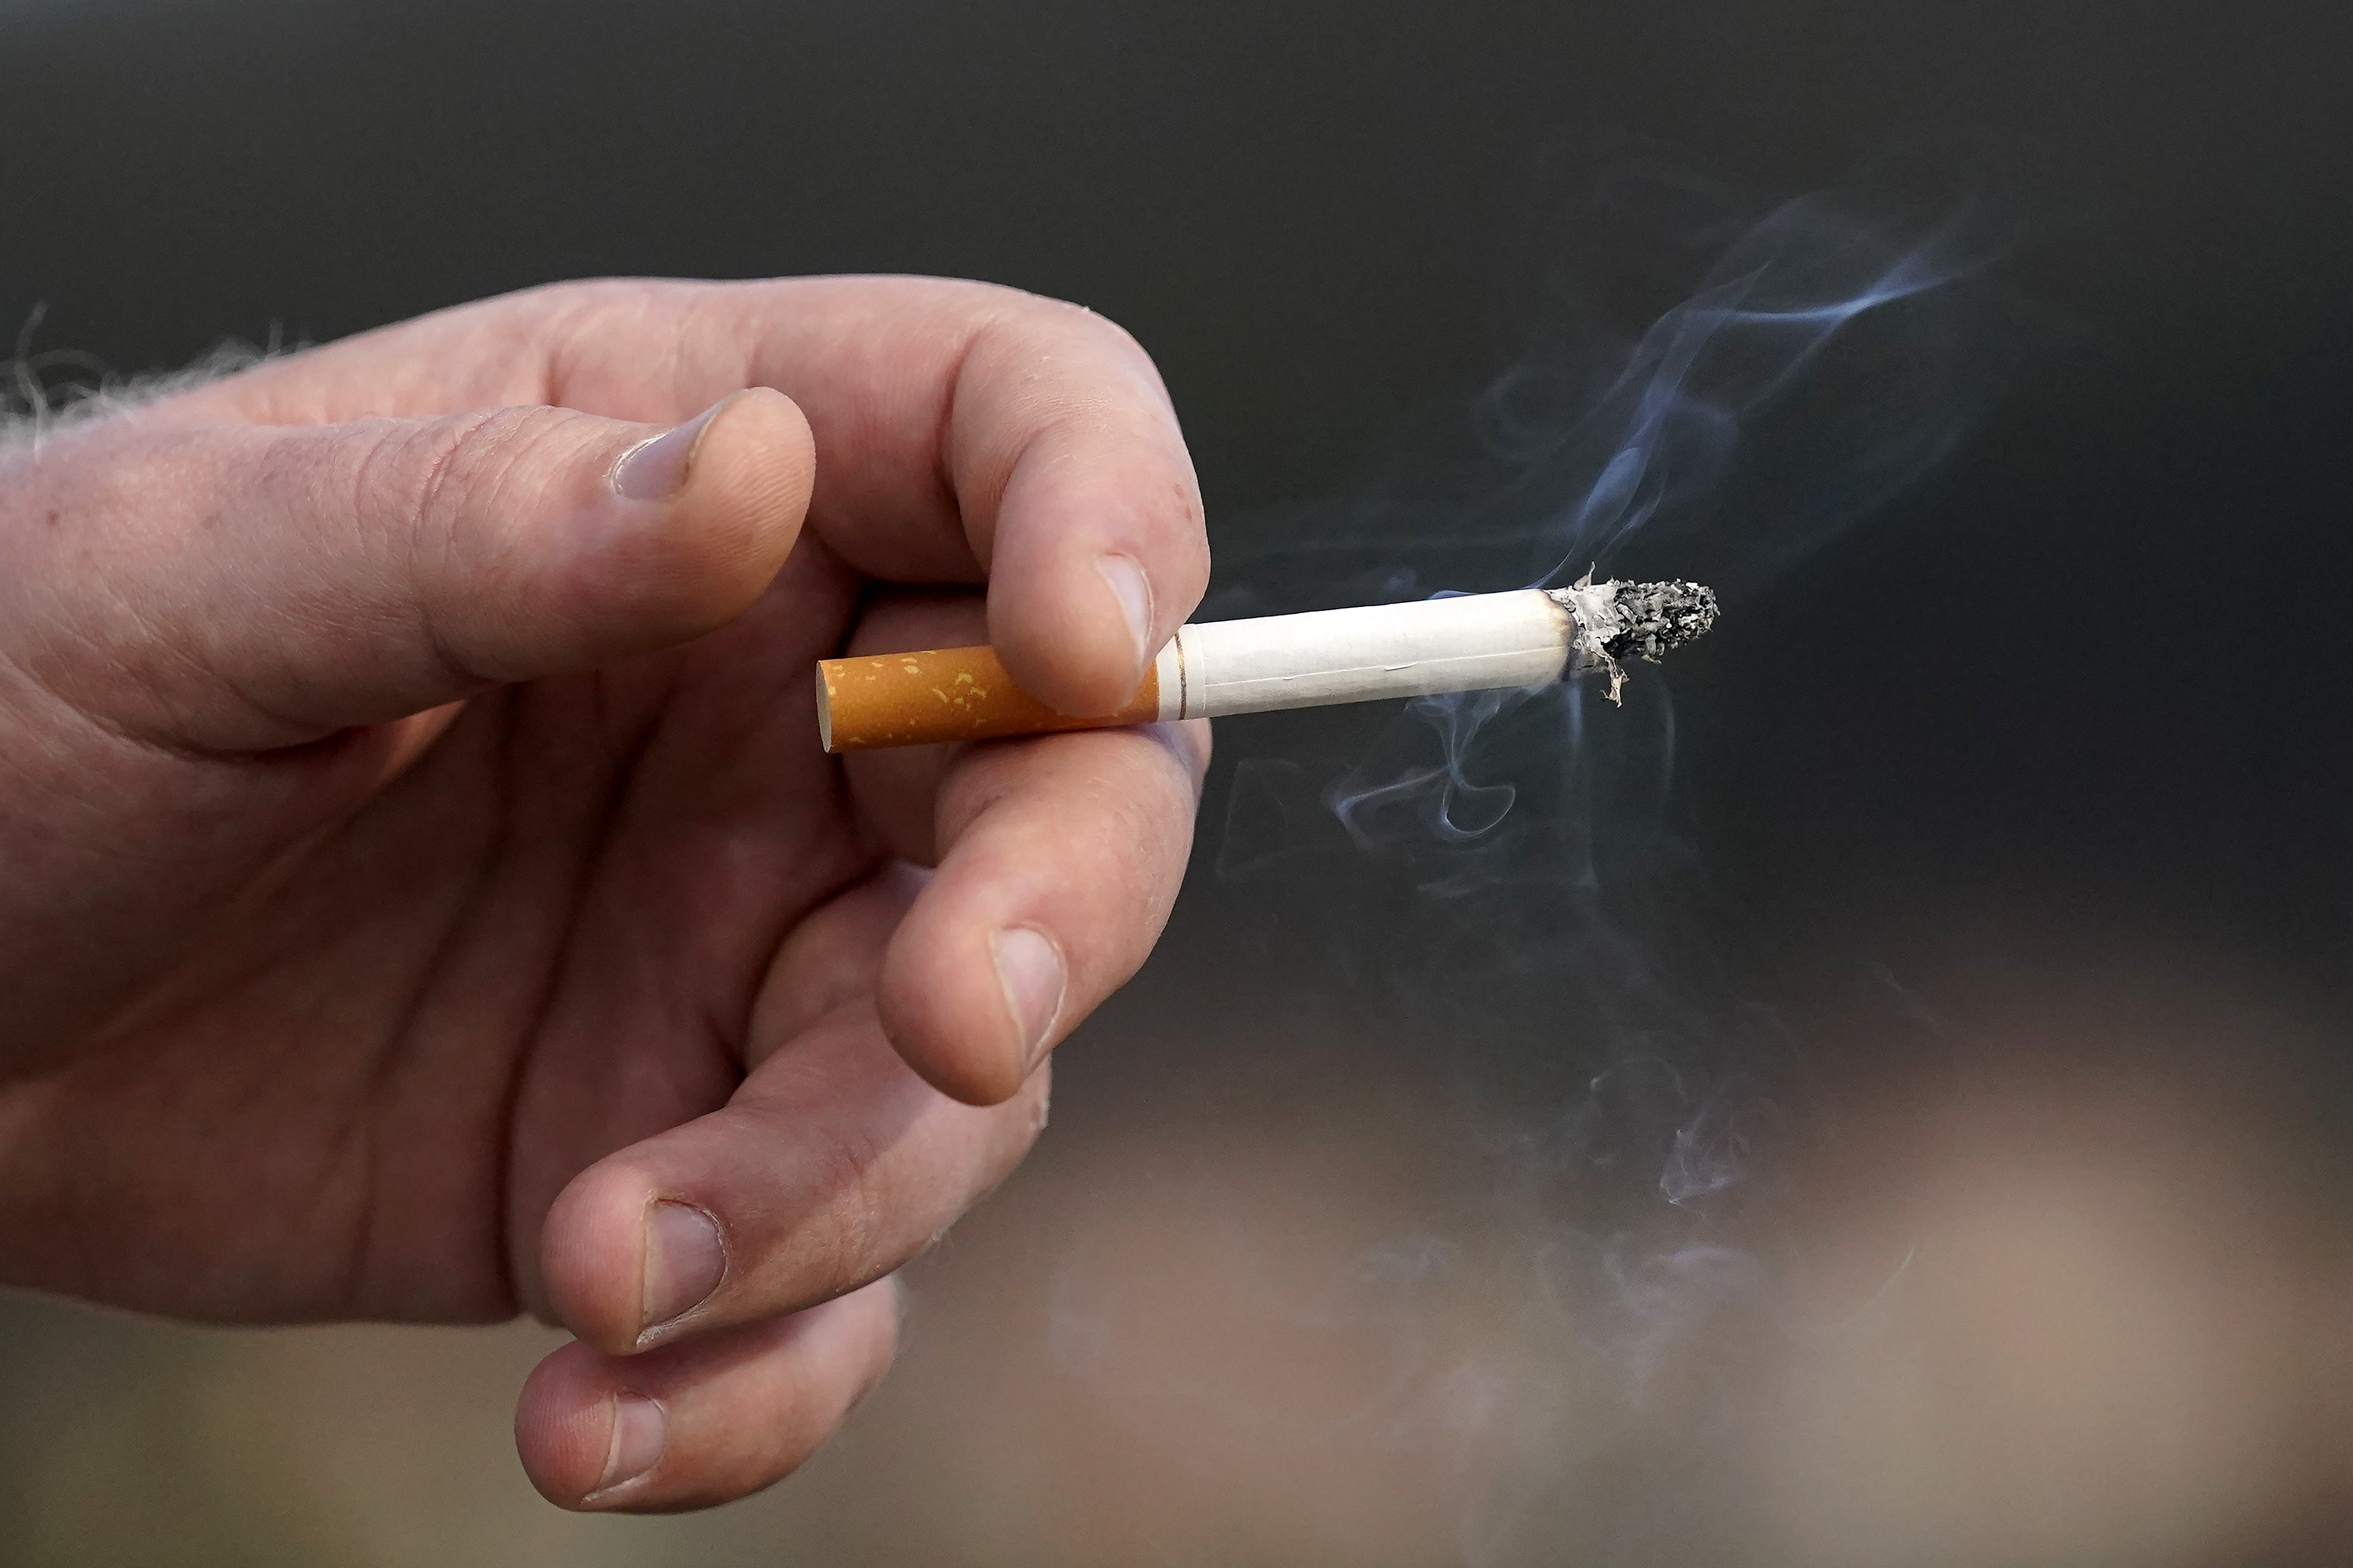 Feds want to make tobacco companies help fund efforts to curb smoking rates